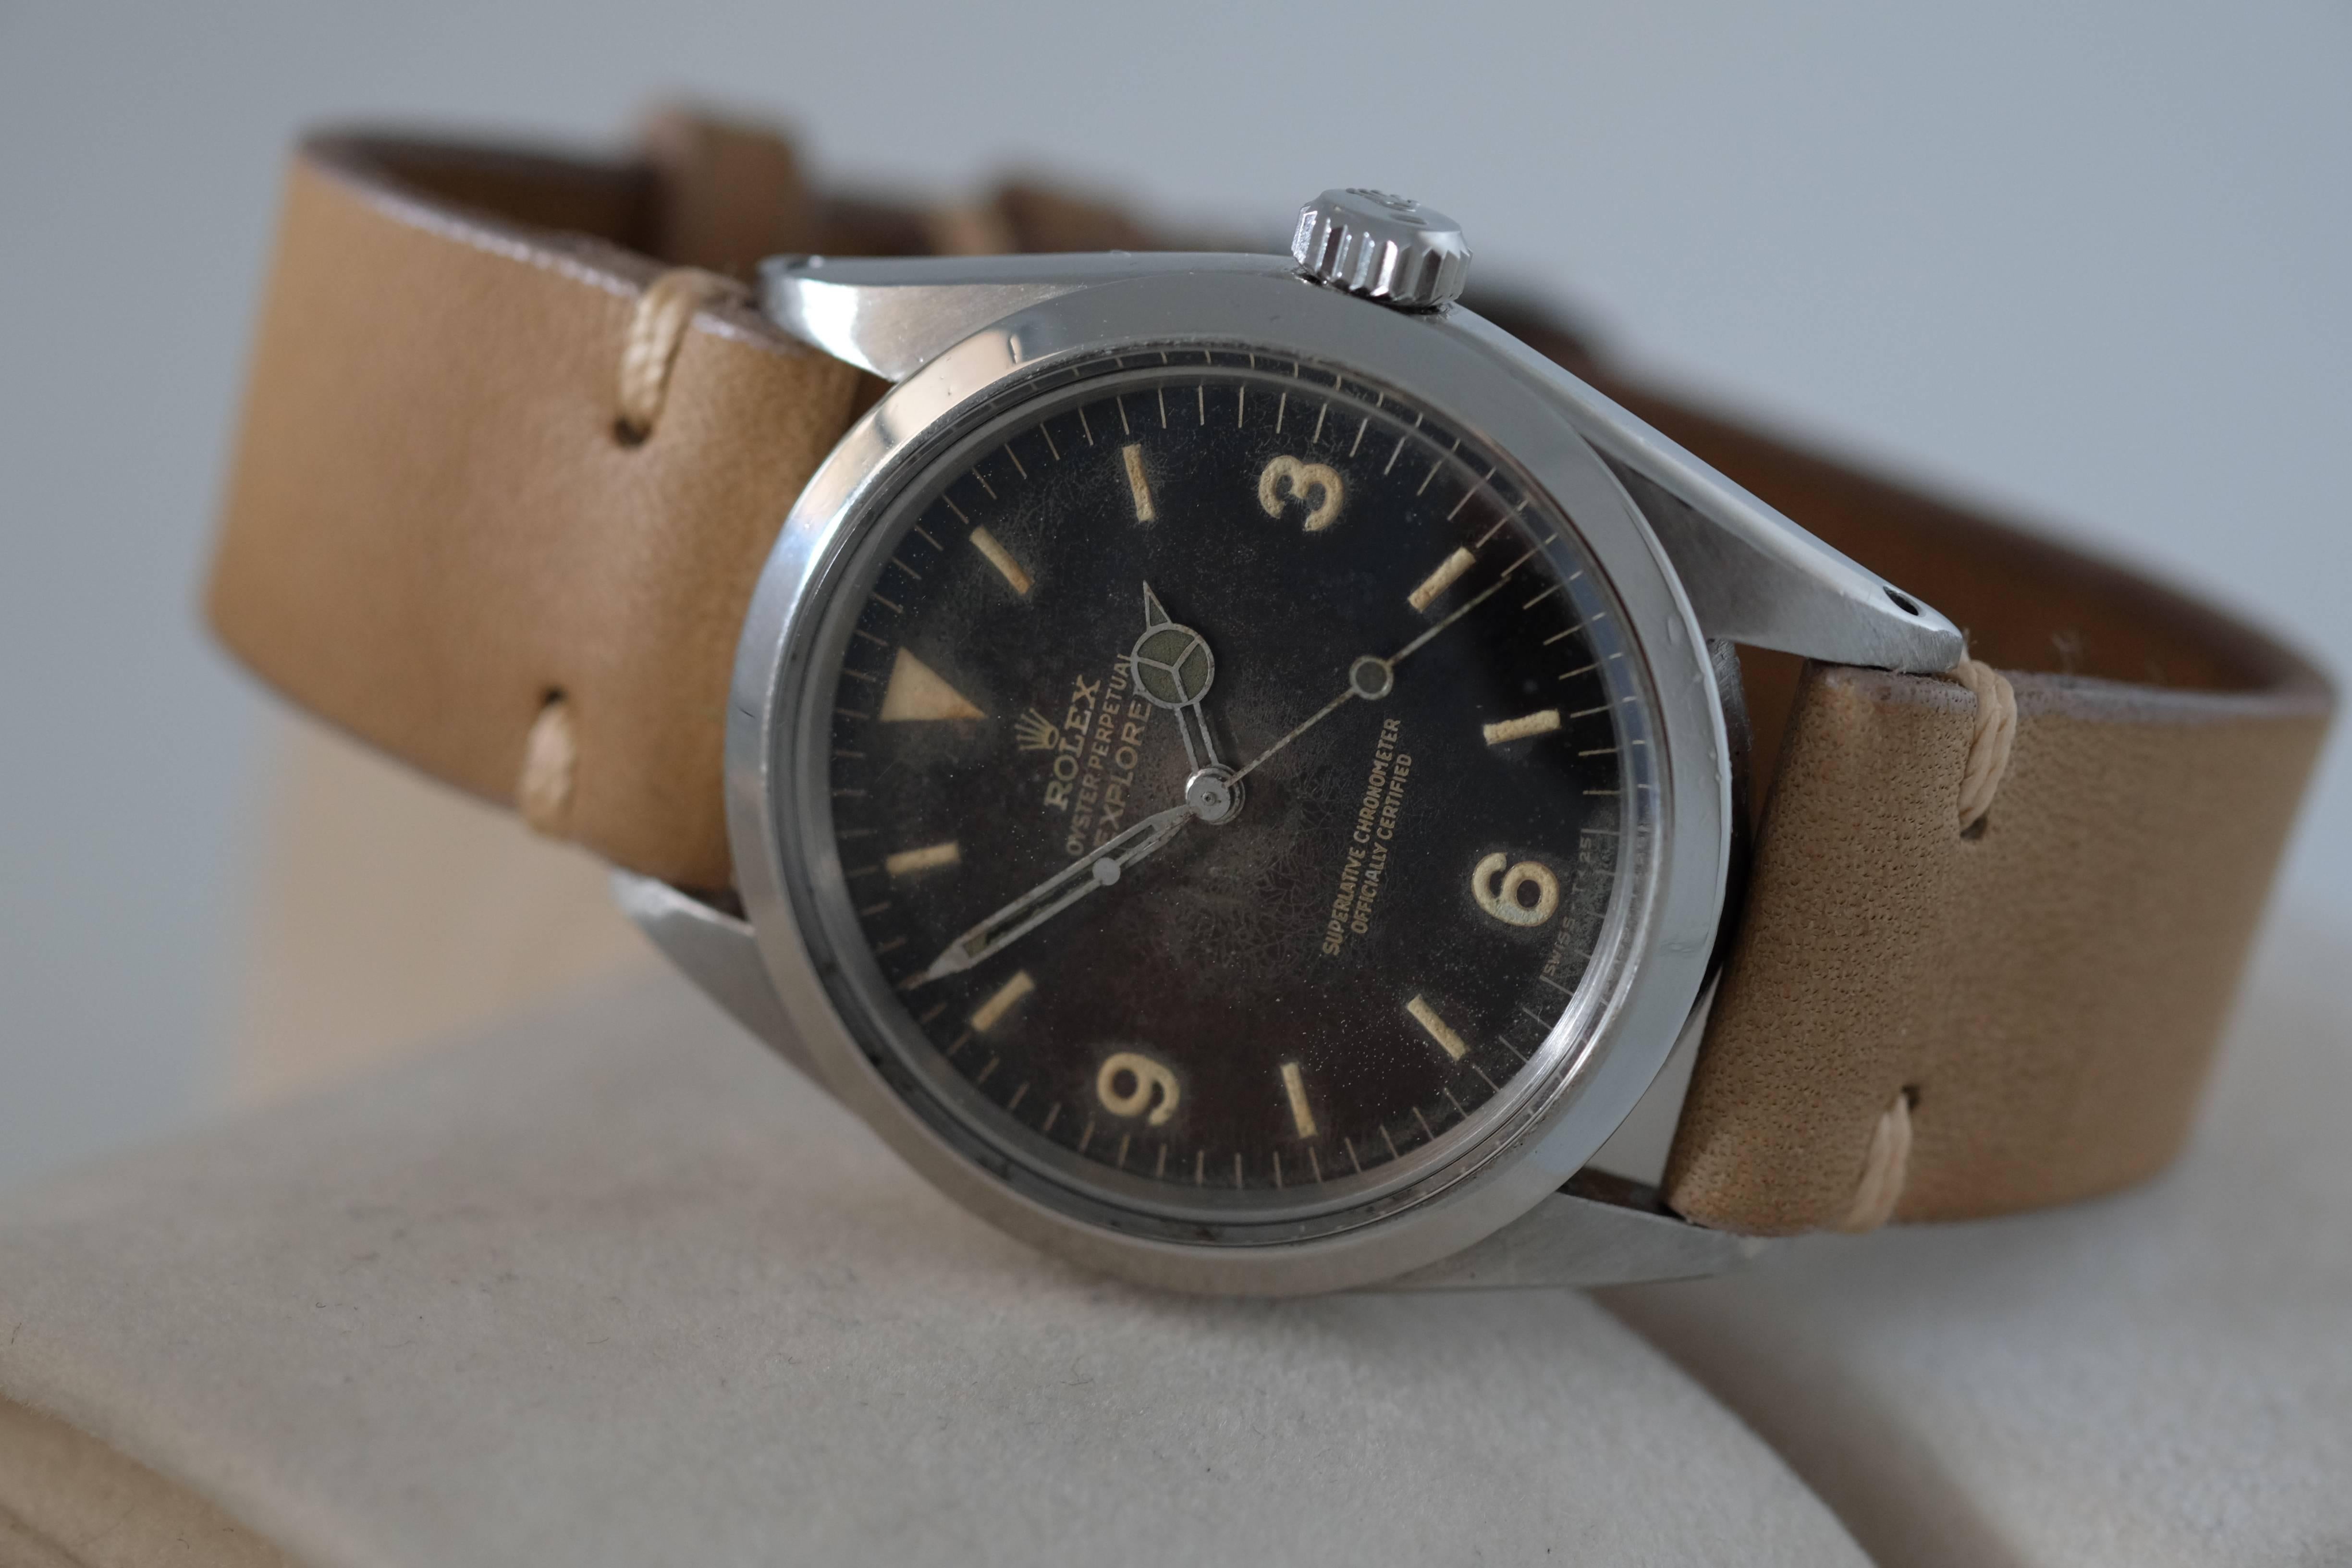 Model: Explorer

Reference: 1016

Circa: 1966

Cal. 1560 automatic jewelled movement, tropical brown dial, luminous baton numerals and Arabic 3,6, and 9 and triangle at 12, luminous Mercedes hands, outer minute divisions, center seconds,